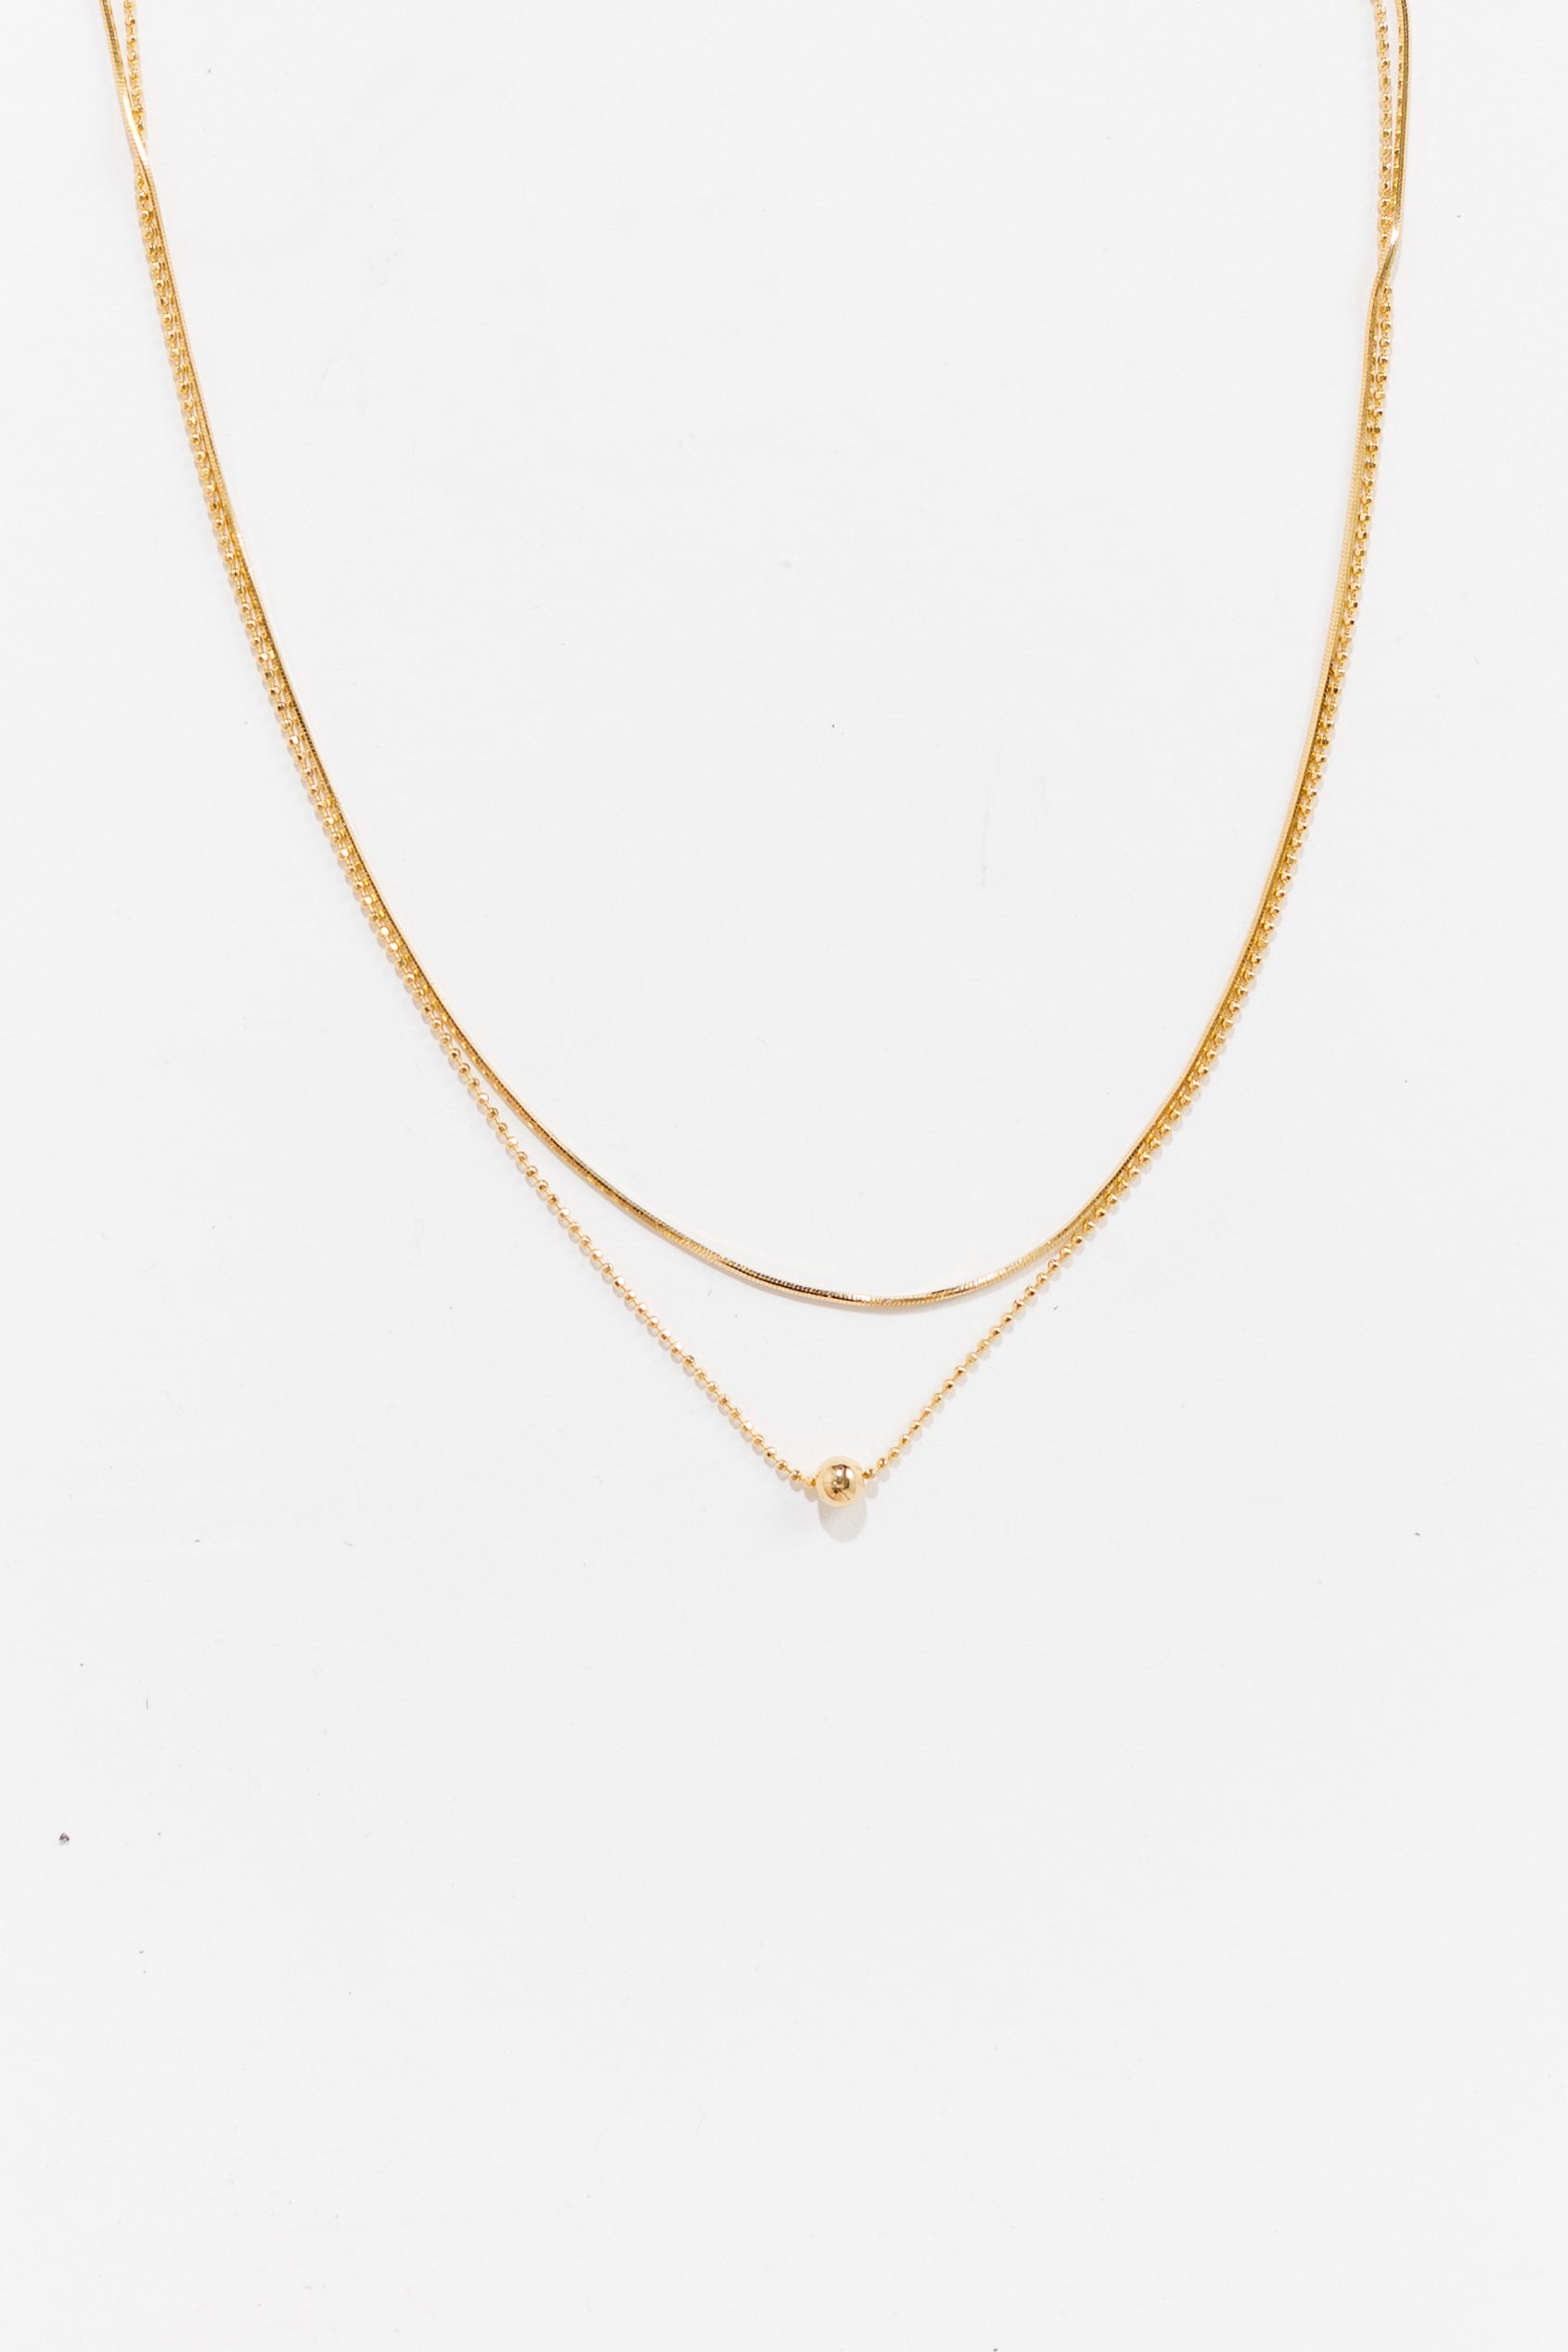 Cove Necklace Double Chain Gold WOMEN'S NECKLACE Cove Accessories 